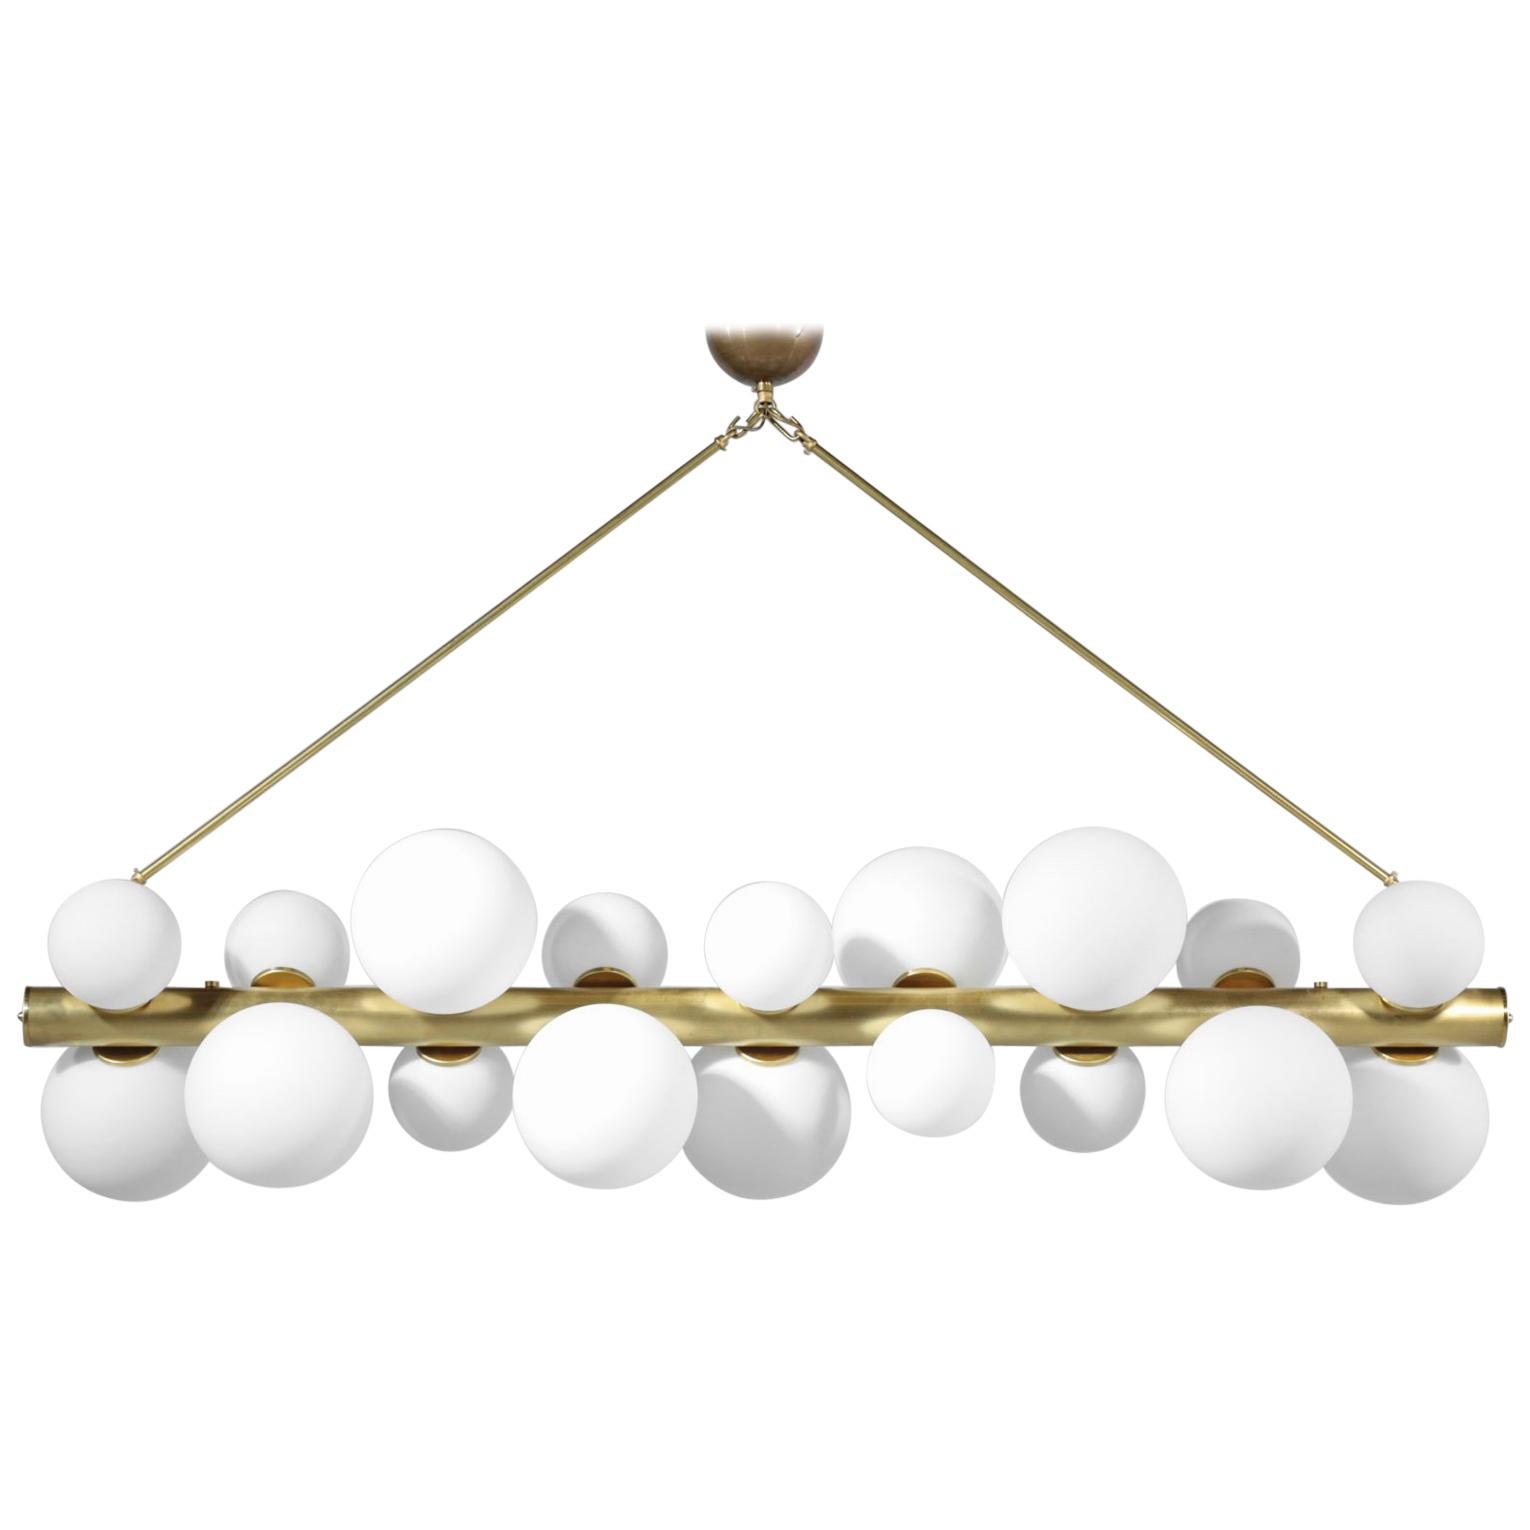 Beautiful modern chandelier Stilnovo style, structure in brass and alu with opaline light. Composed of 18 globes.
Artisanal work.
Bulb E14.
Great quality work

Custom on request.